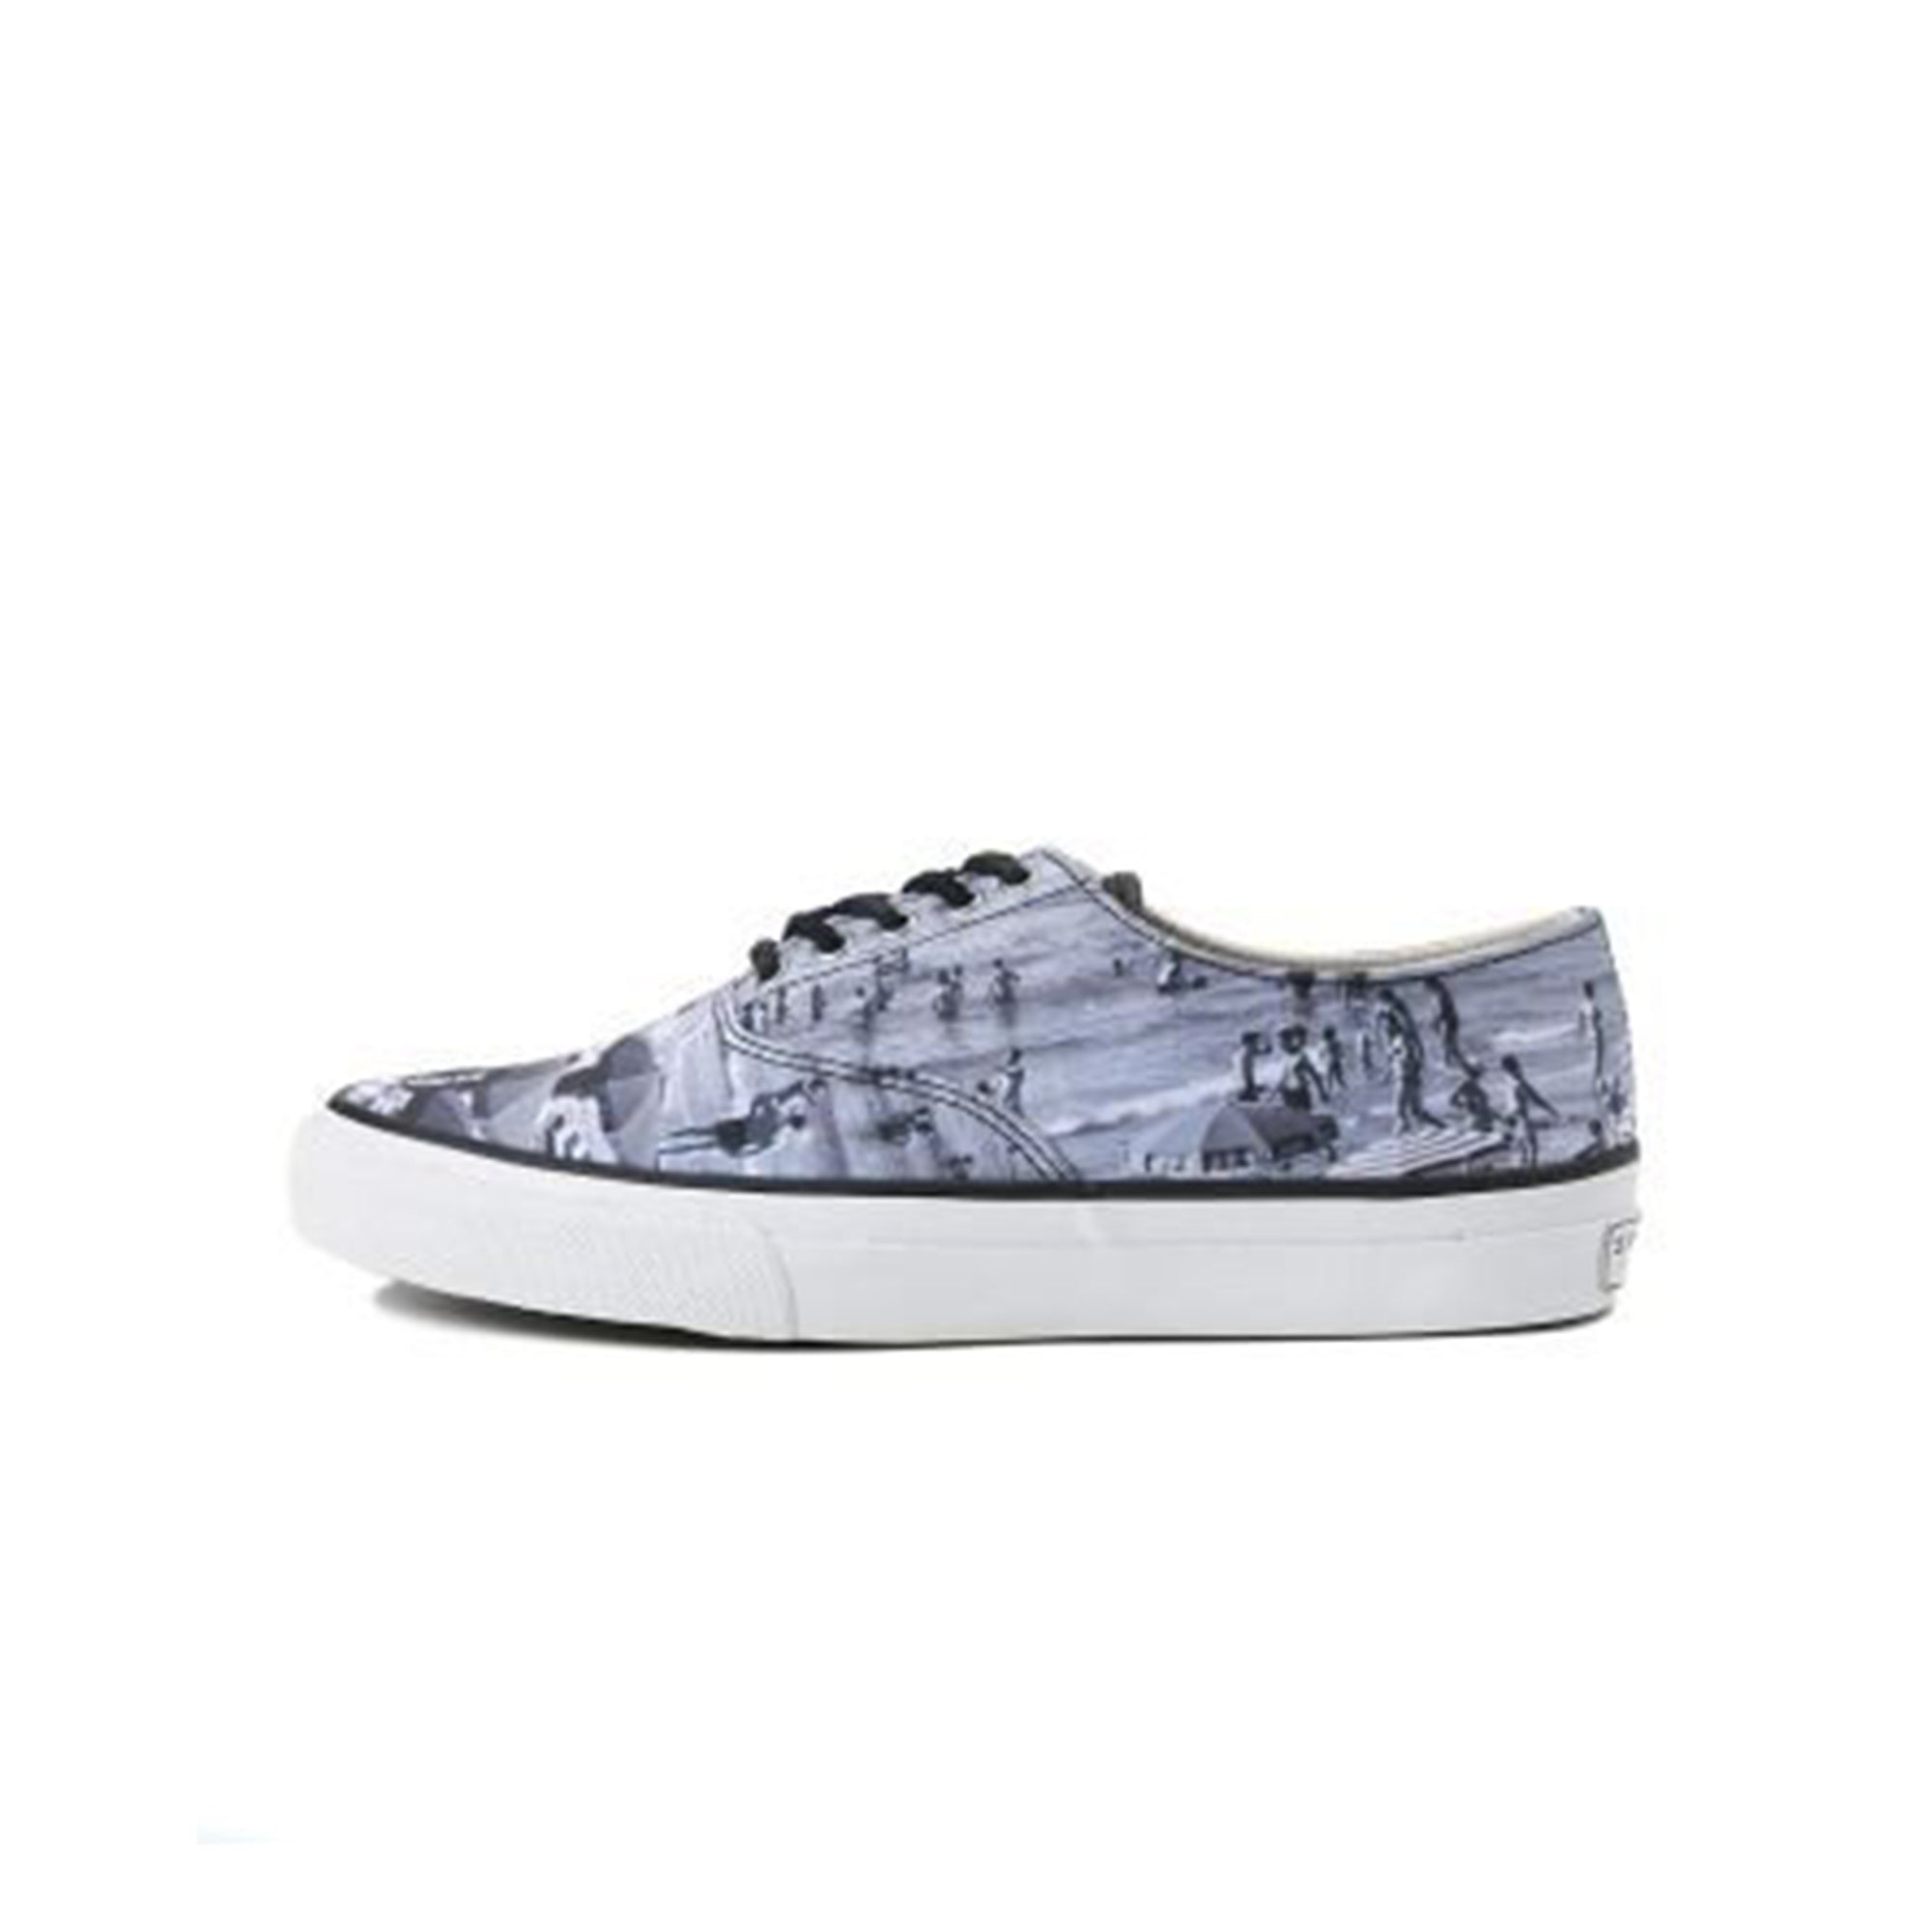 Sperry Mens Cloud CVO Slip On Shoes